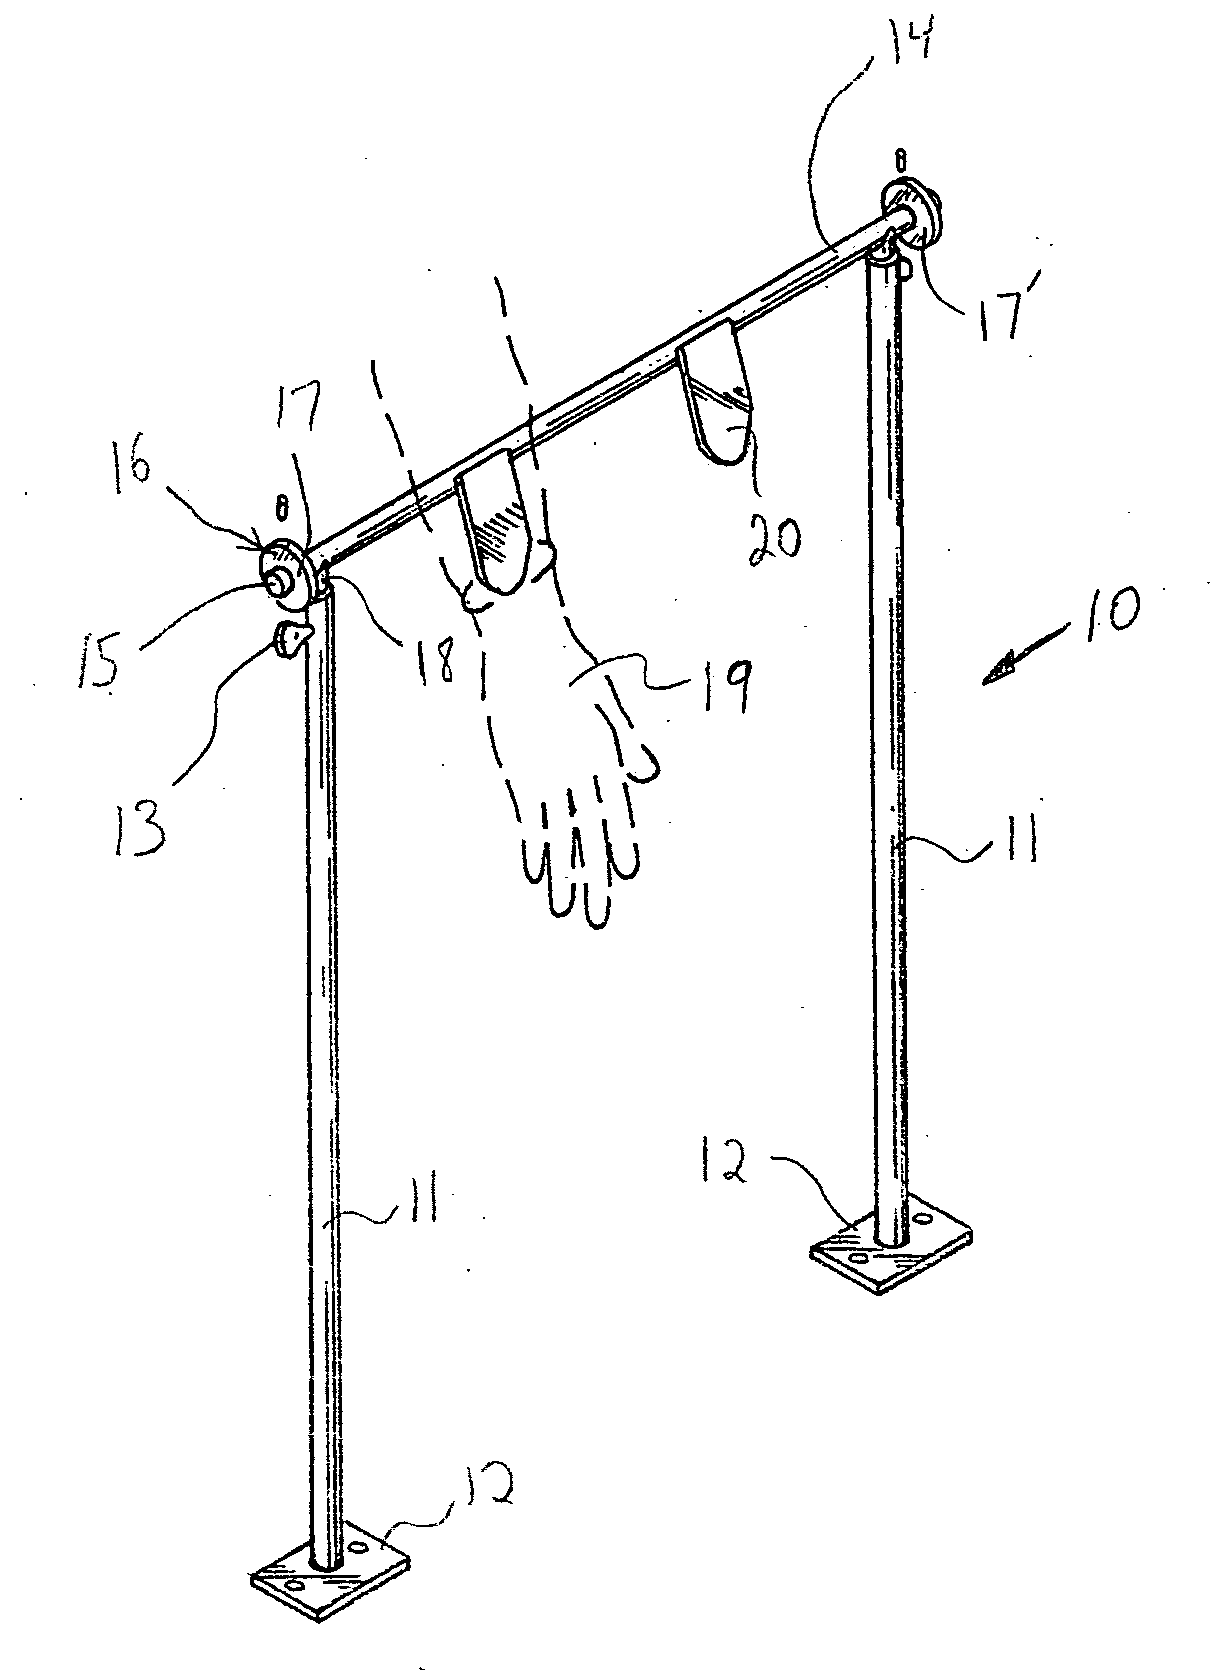 Fully-adjustable glove removal apparatus